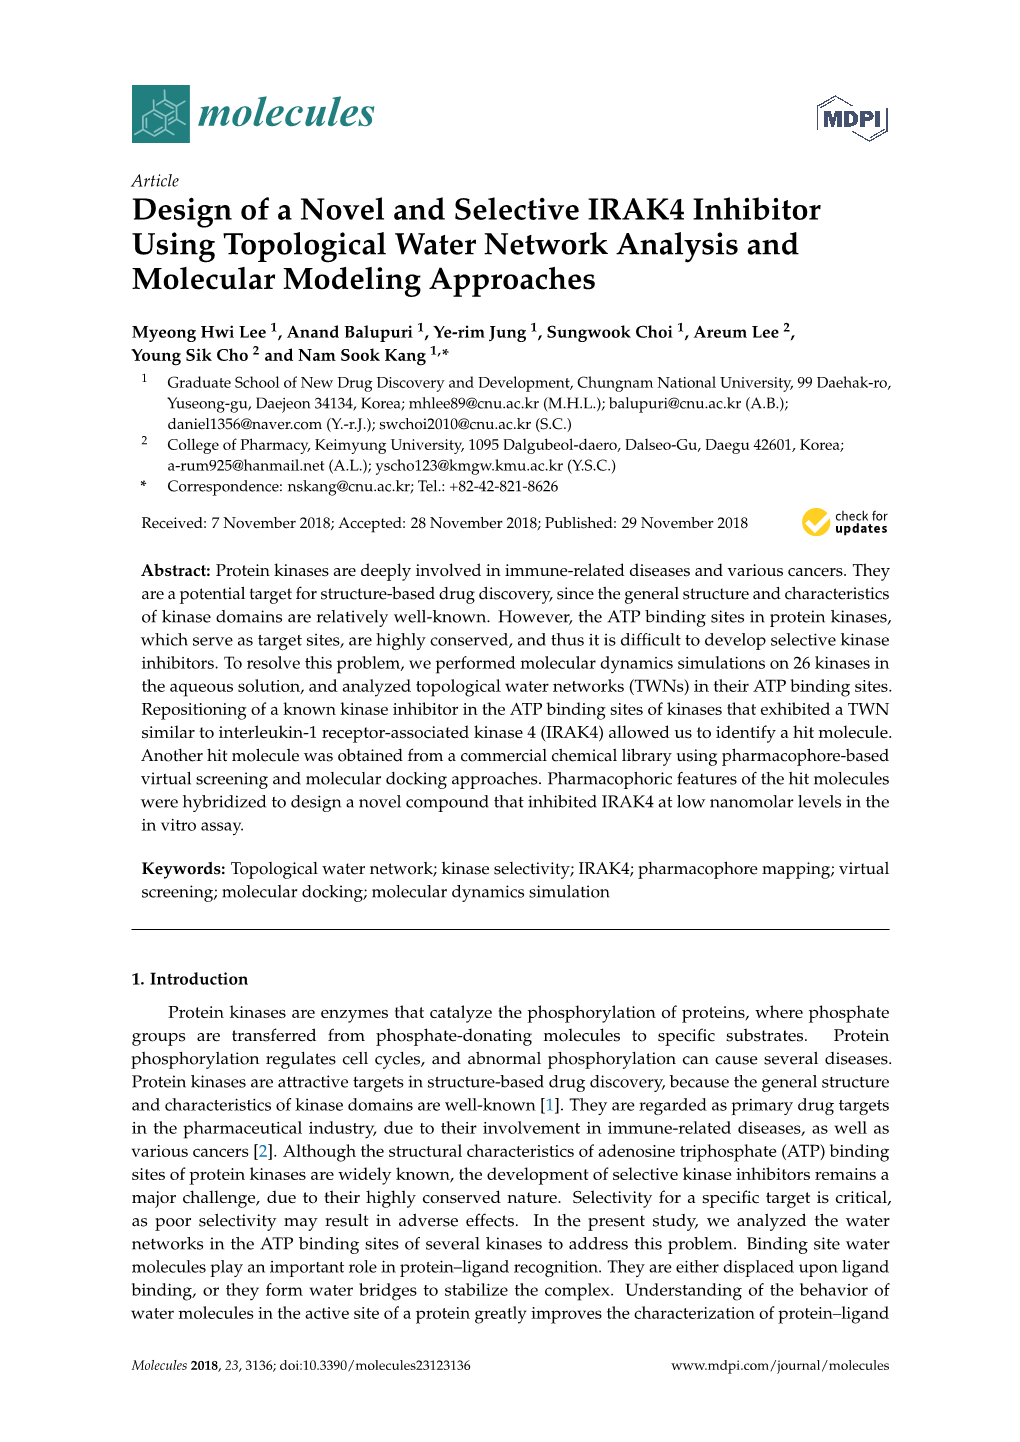 Design of a Novel and Selective IRAK4 Inhibitor Using Topological Water Network Analysis and Molecular Modeling Approaches